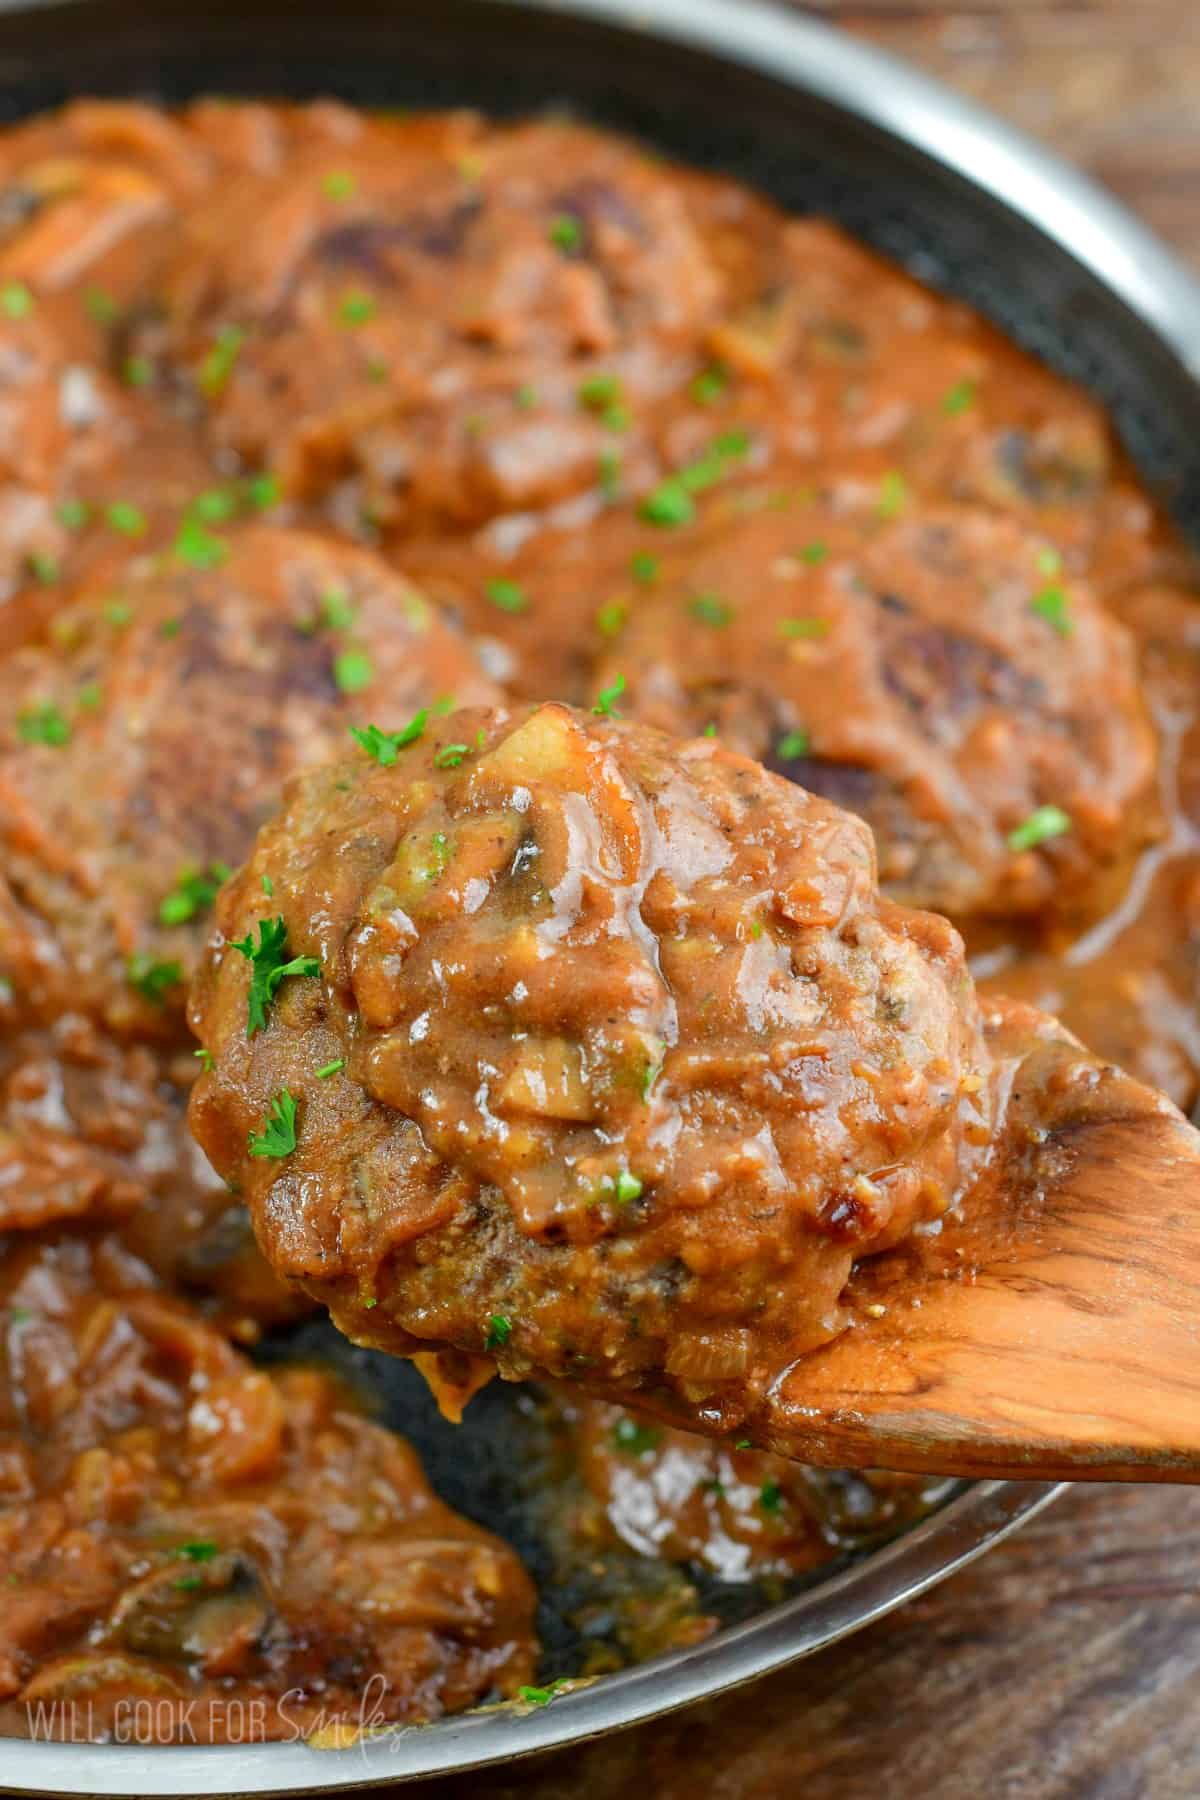 Holding a Salisbury steak on a wood spatula with the rest of the steaks in a pan.